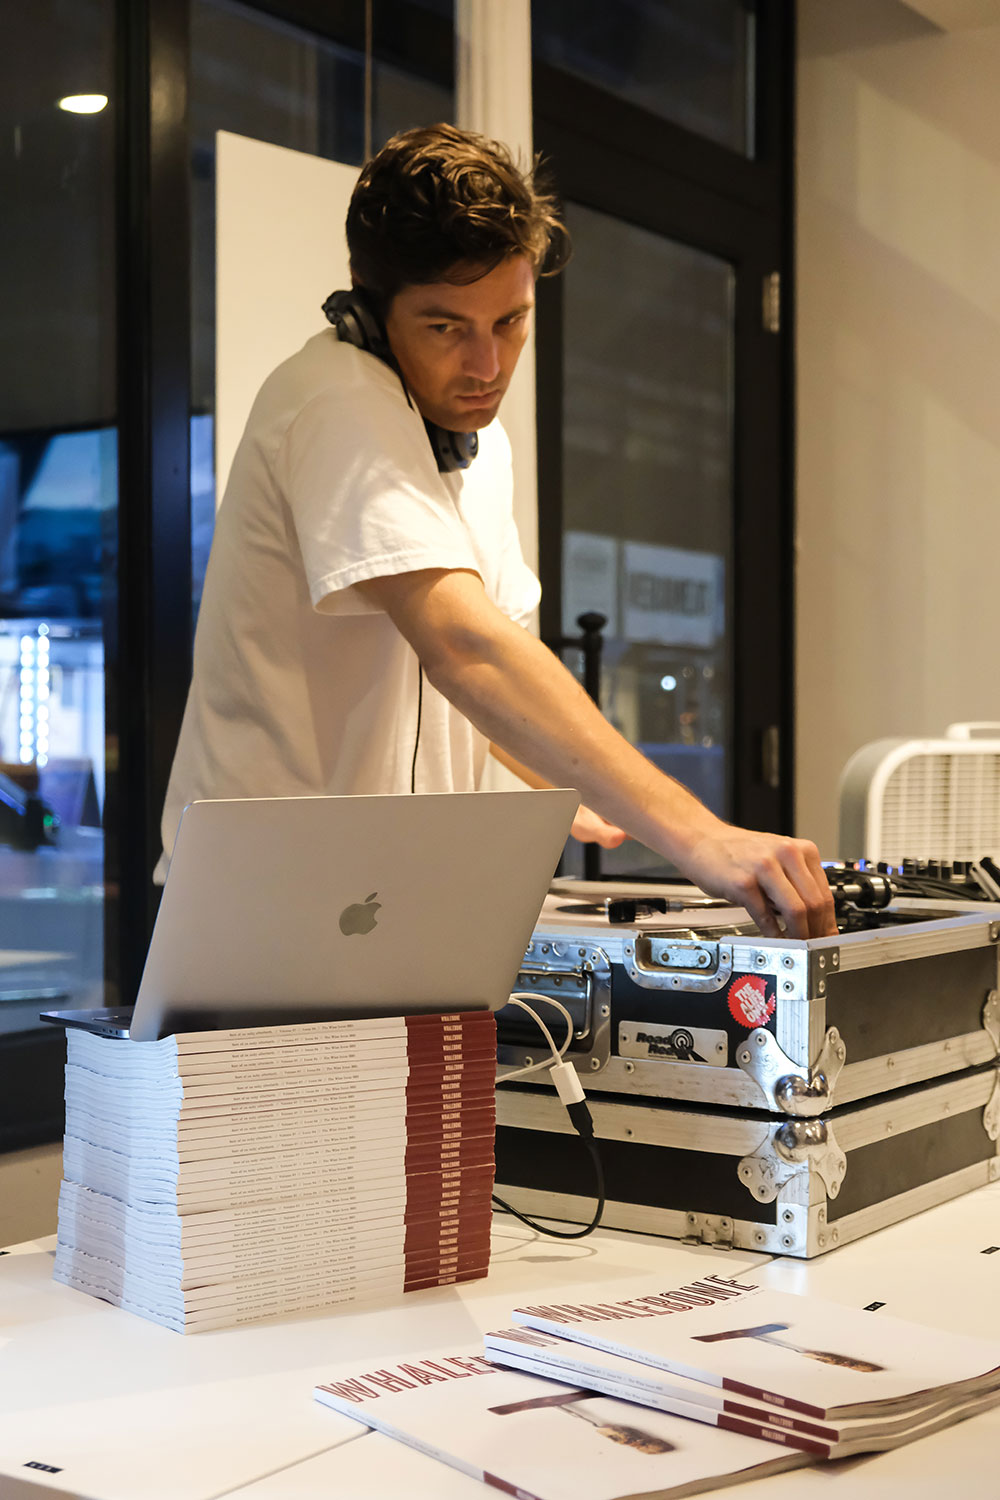 DJ William Grand sets up and works his equipment at the Whalebone Magazine Wine Issue Release Party at Whalebone on Bleecker in New York City